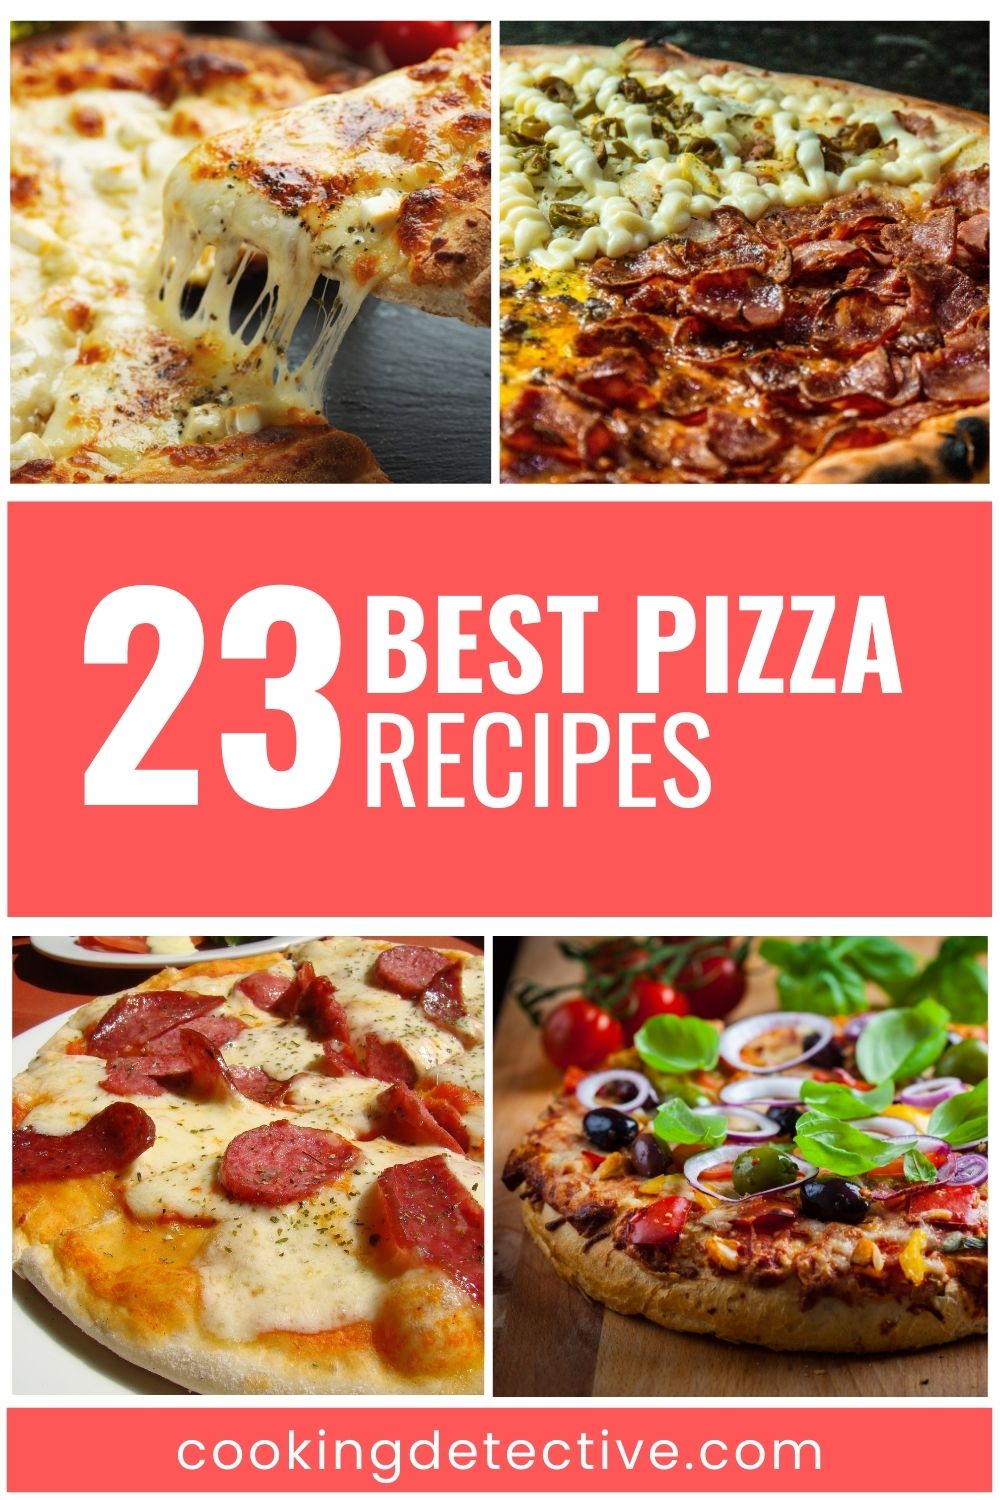 23 Best Pizza Recipes That Will Make Your Day!!!